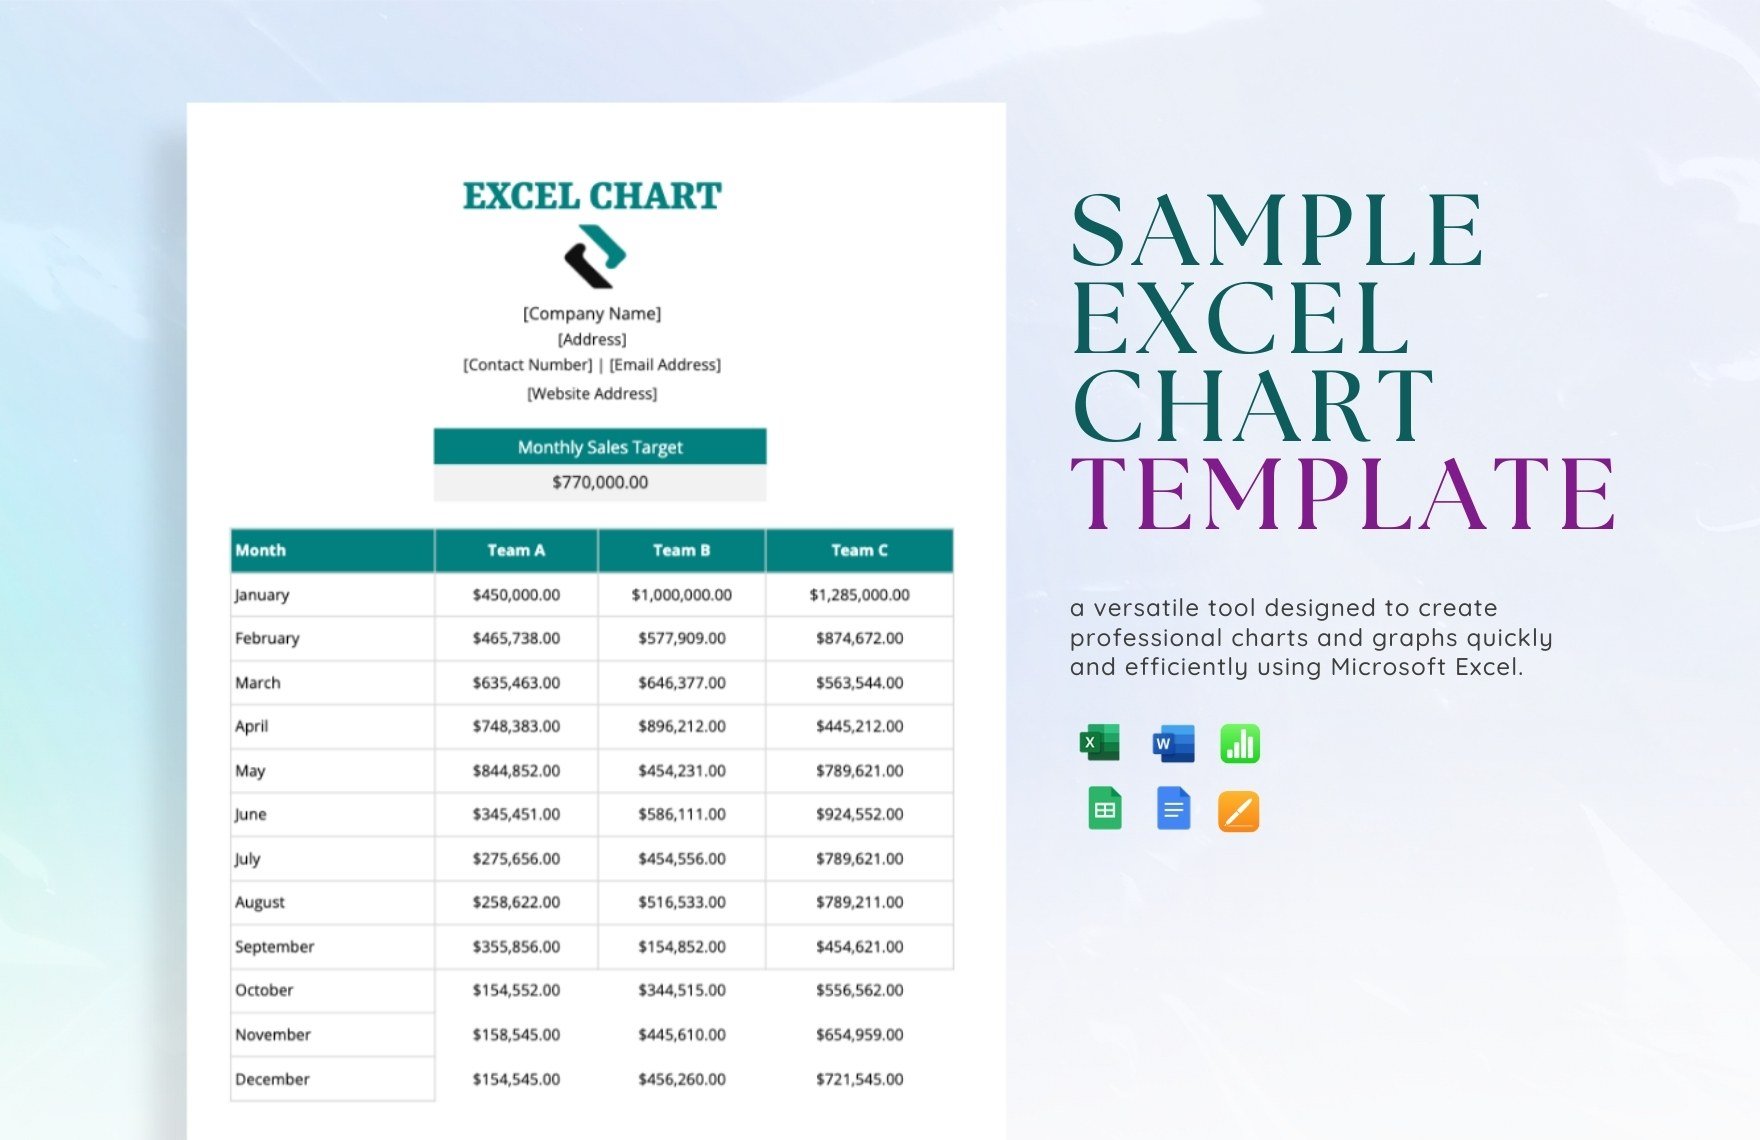 Sample Excel Chart Template in Word, Google Docs, Excel, Google Sheets, Apple Pages, Apple Numbers